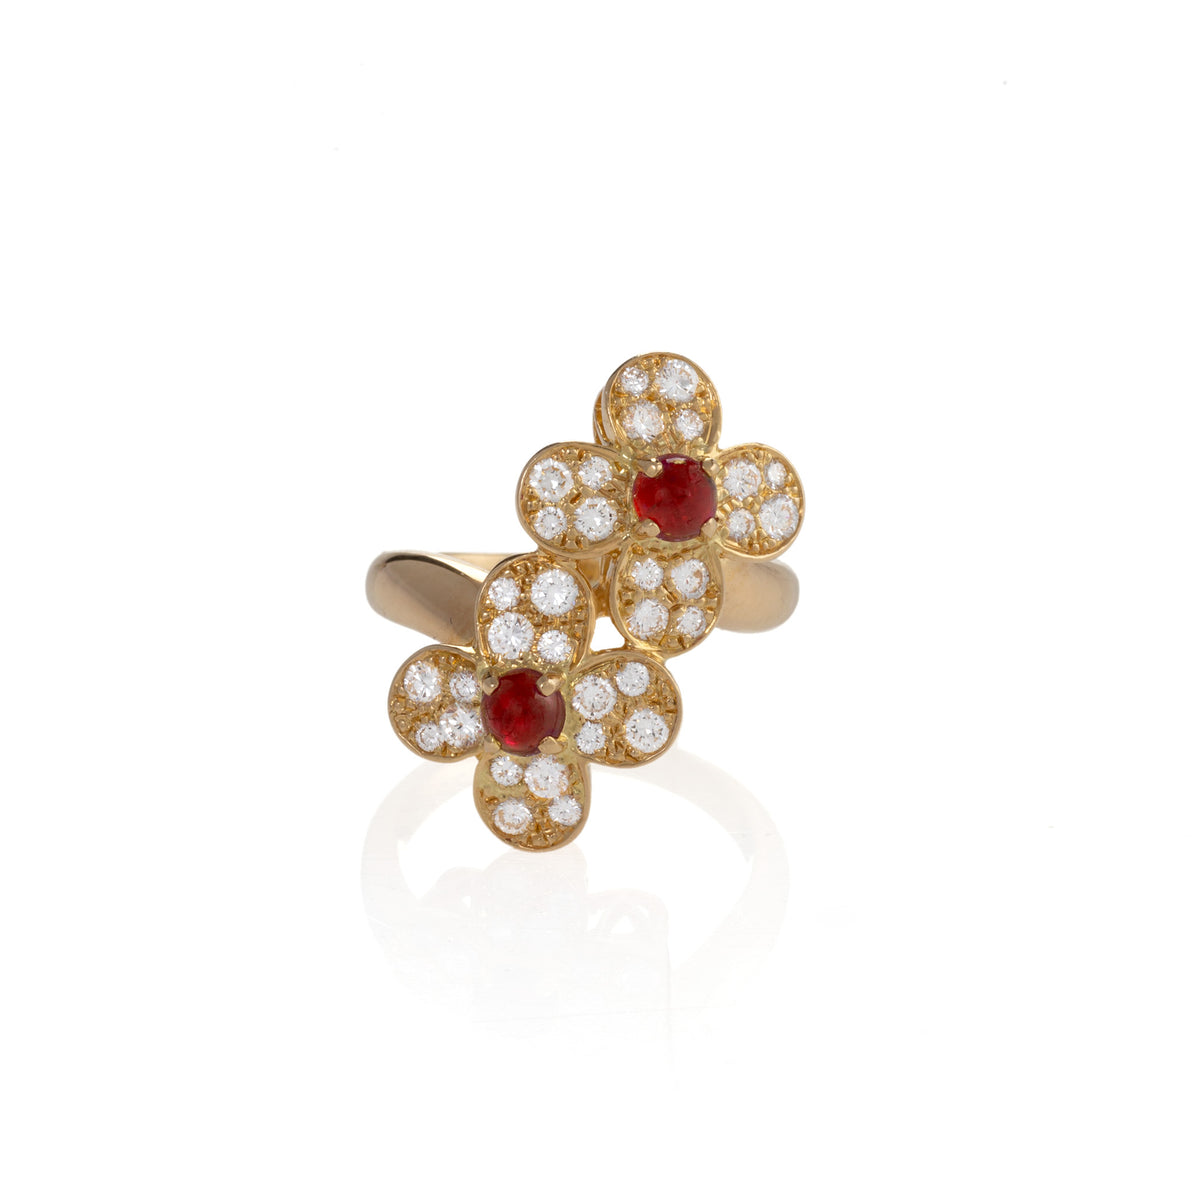 With its shape inspired by the - Van Cleef & Arpels